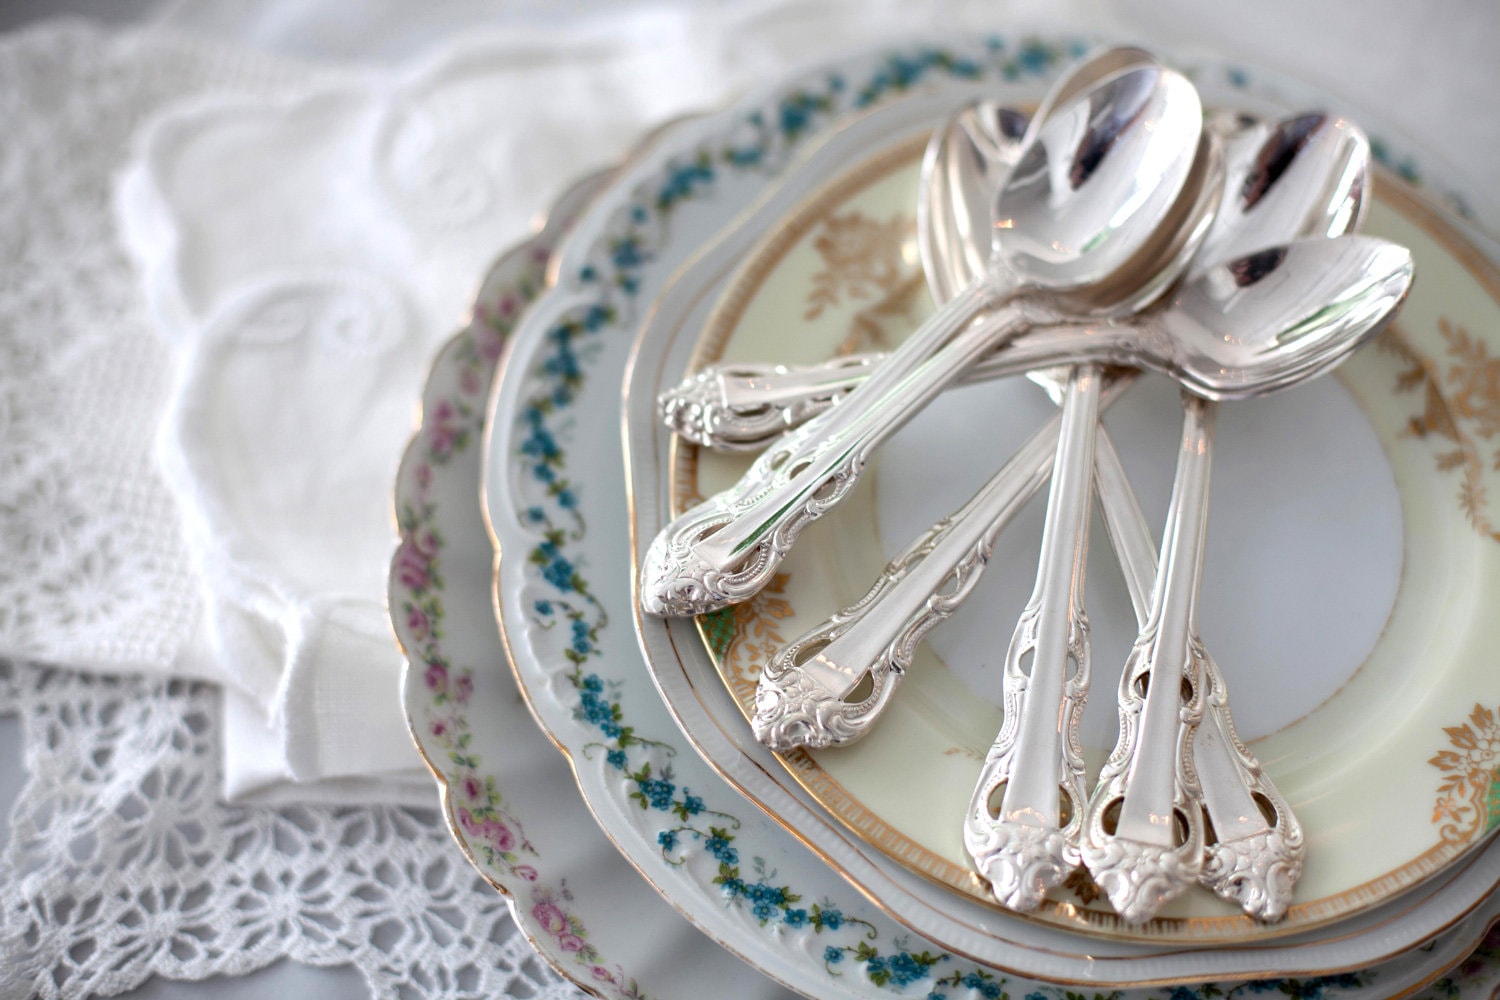 A stack of vintage floral plates with silver teaspoons on a table near lace doilies.